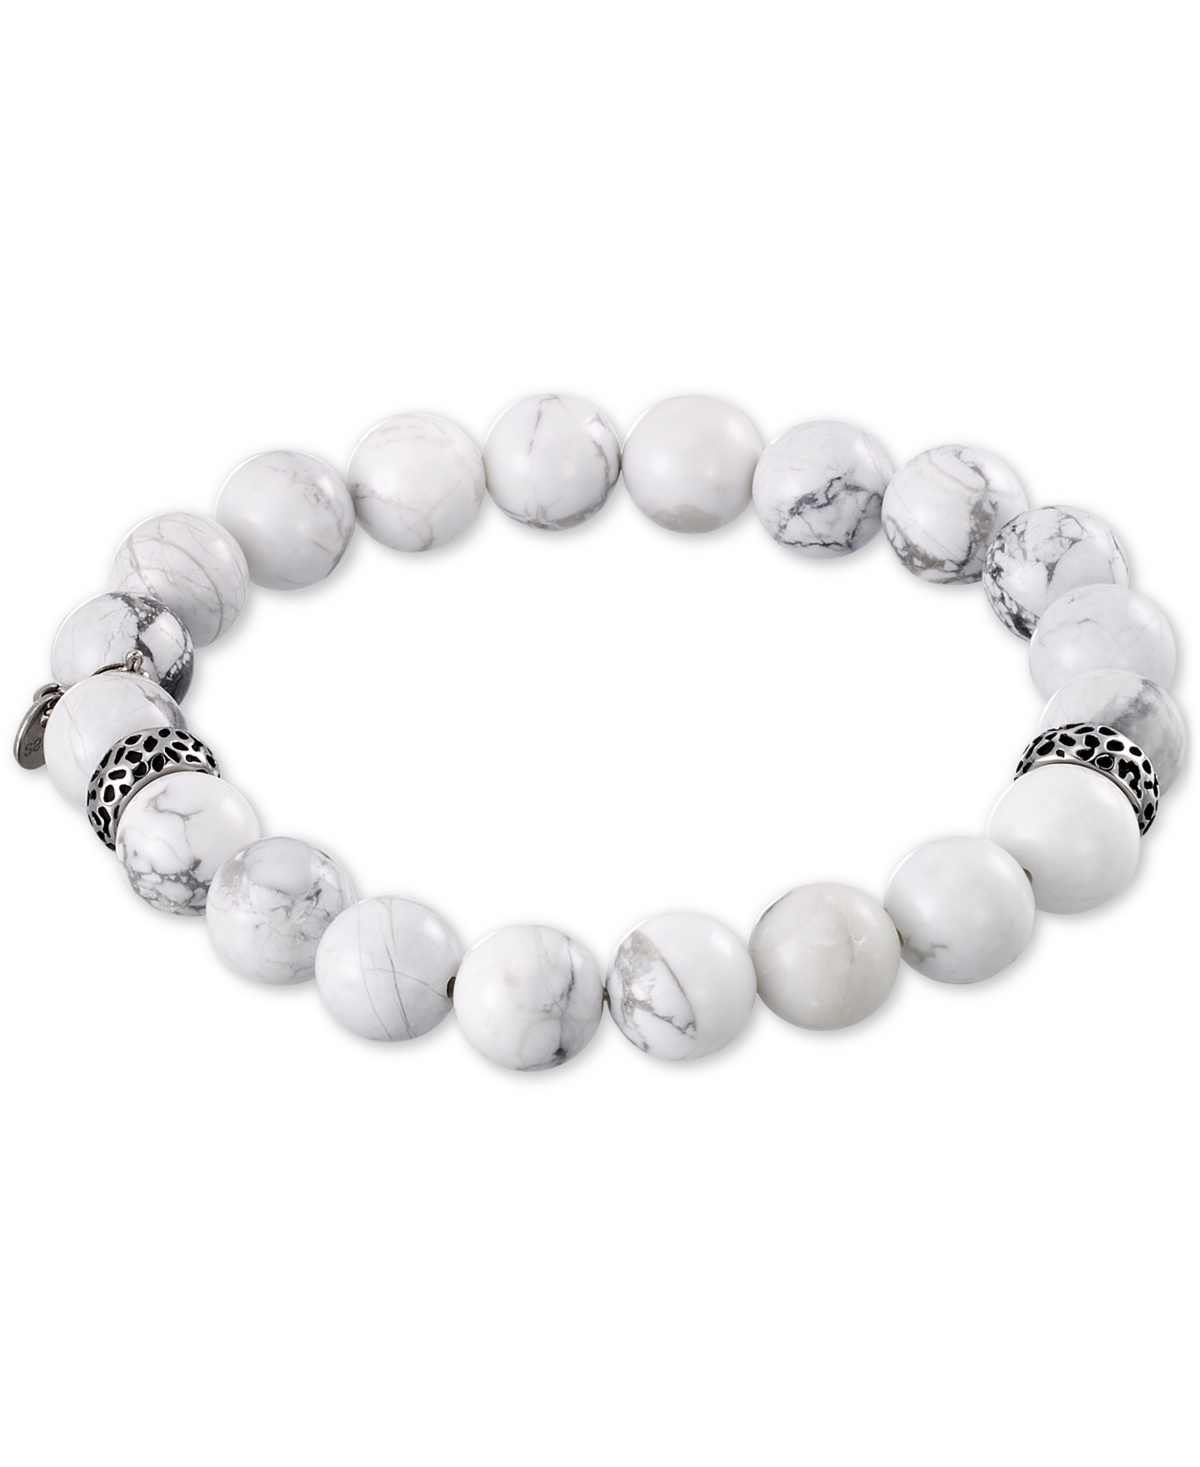 Smith White Agate (10mm) Beaded Stretch Bracelet in Stainless Steel - Stainless Steel